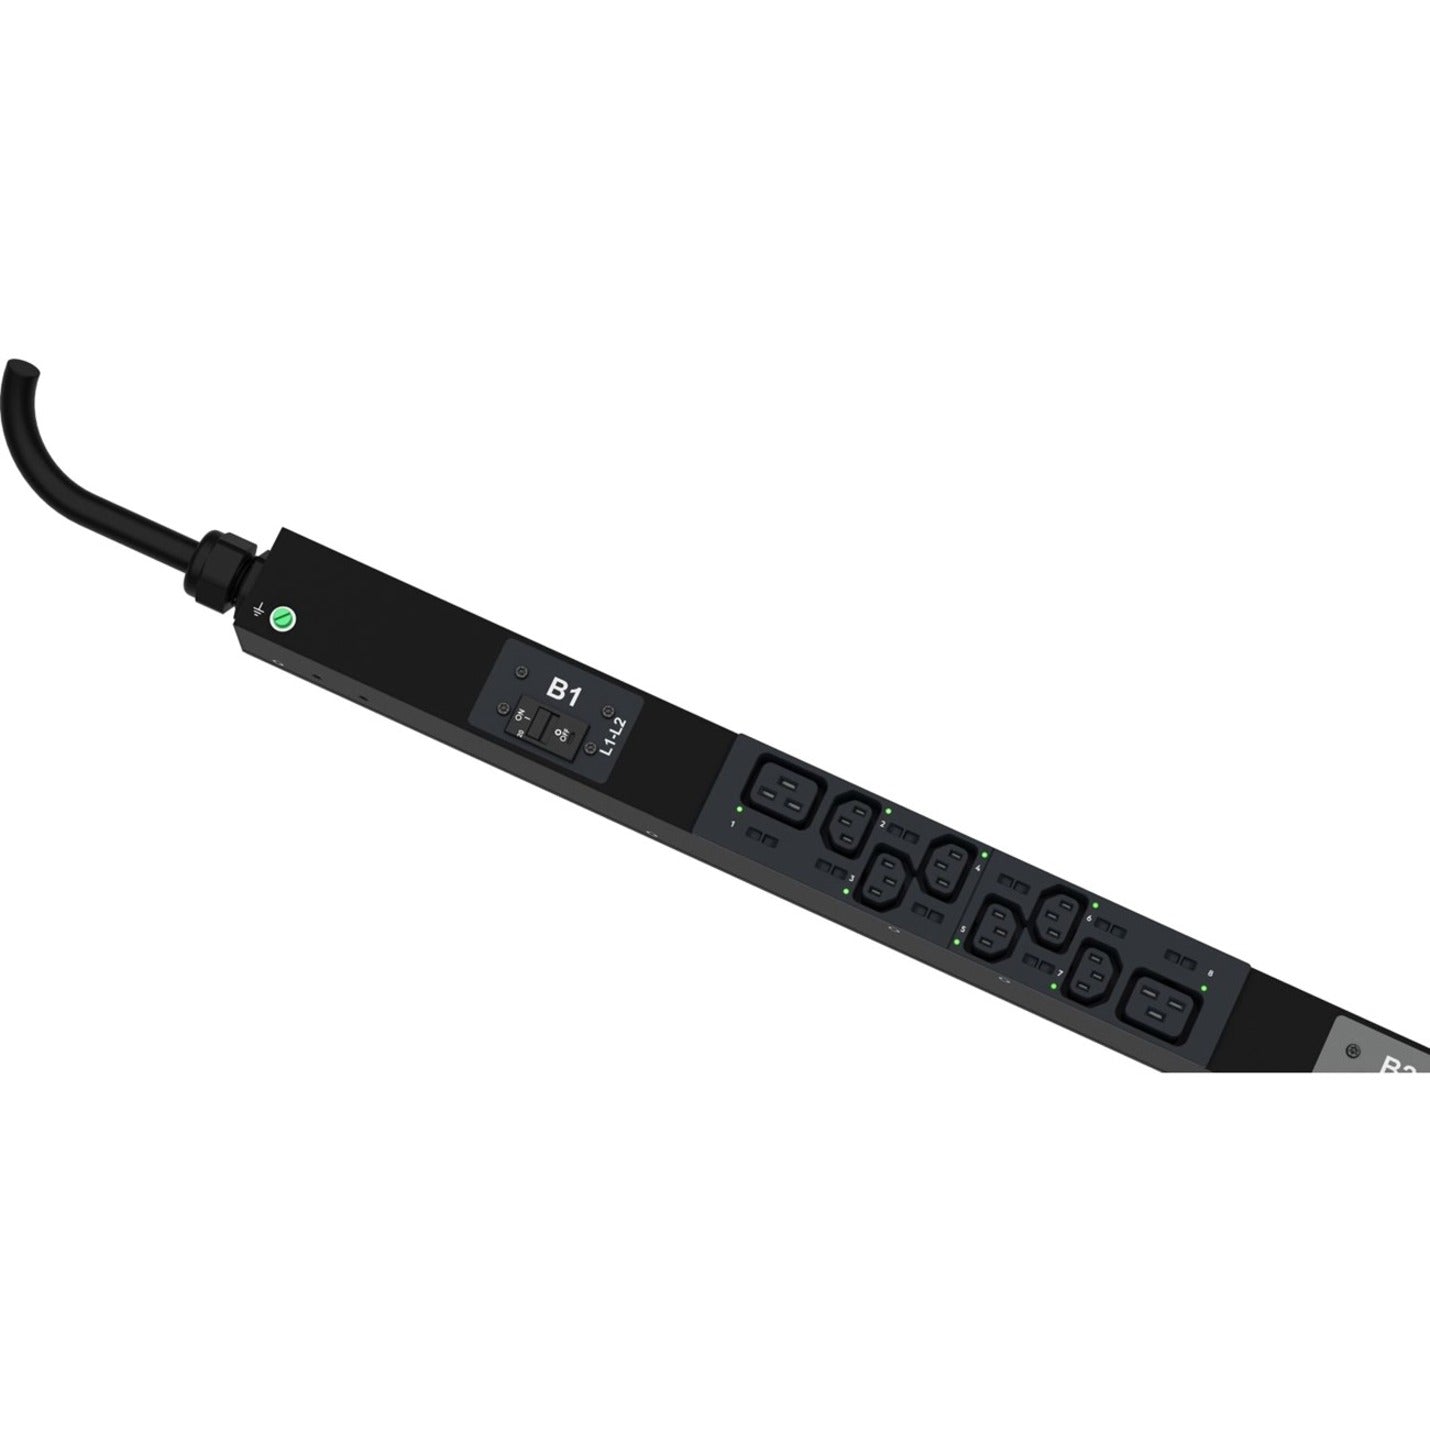 Panduit P24G14M Monitored & Switched per Outlet PDU